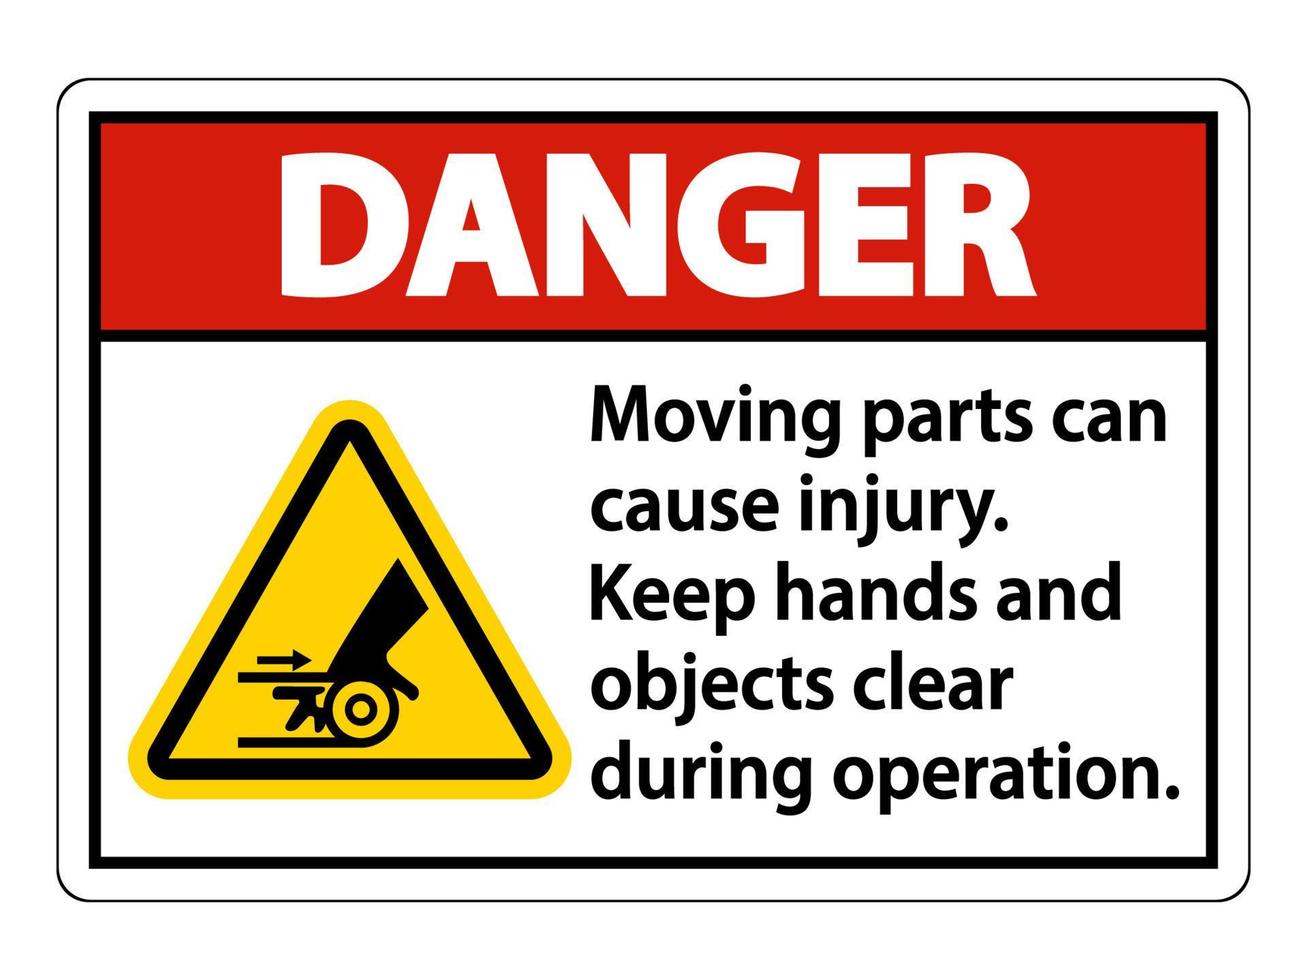 Danger Moving parts can cause injury sign on white background vector